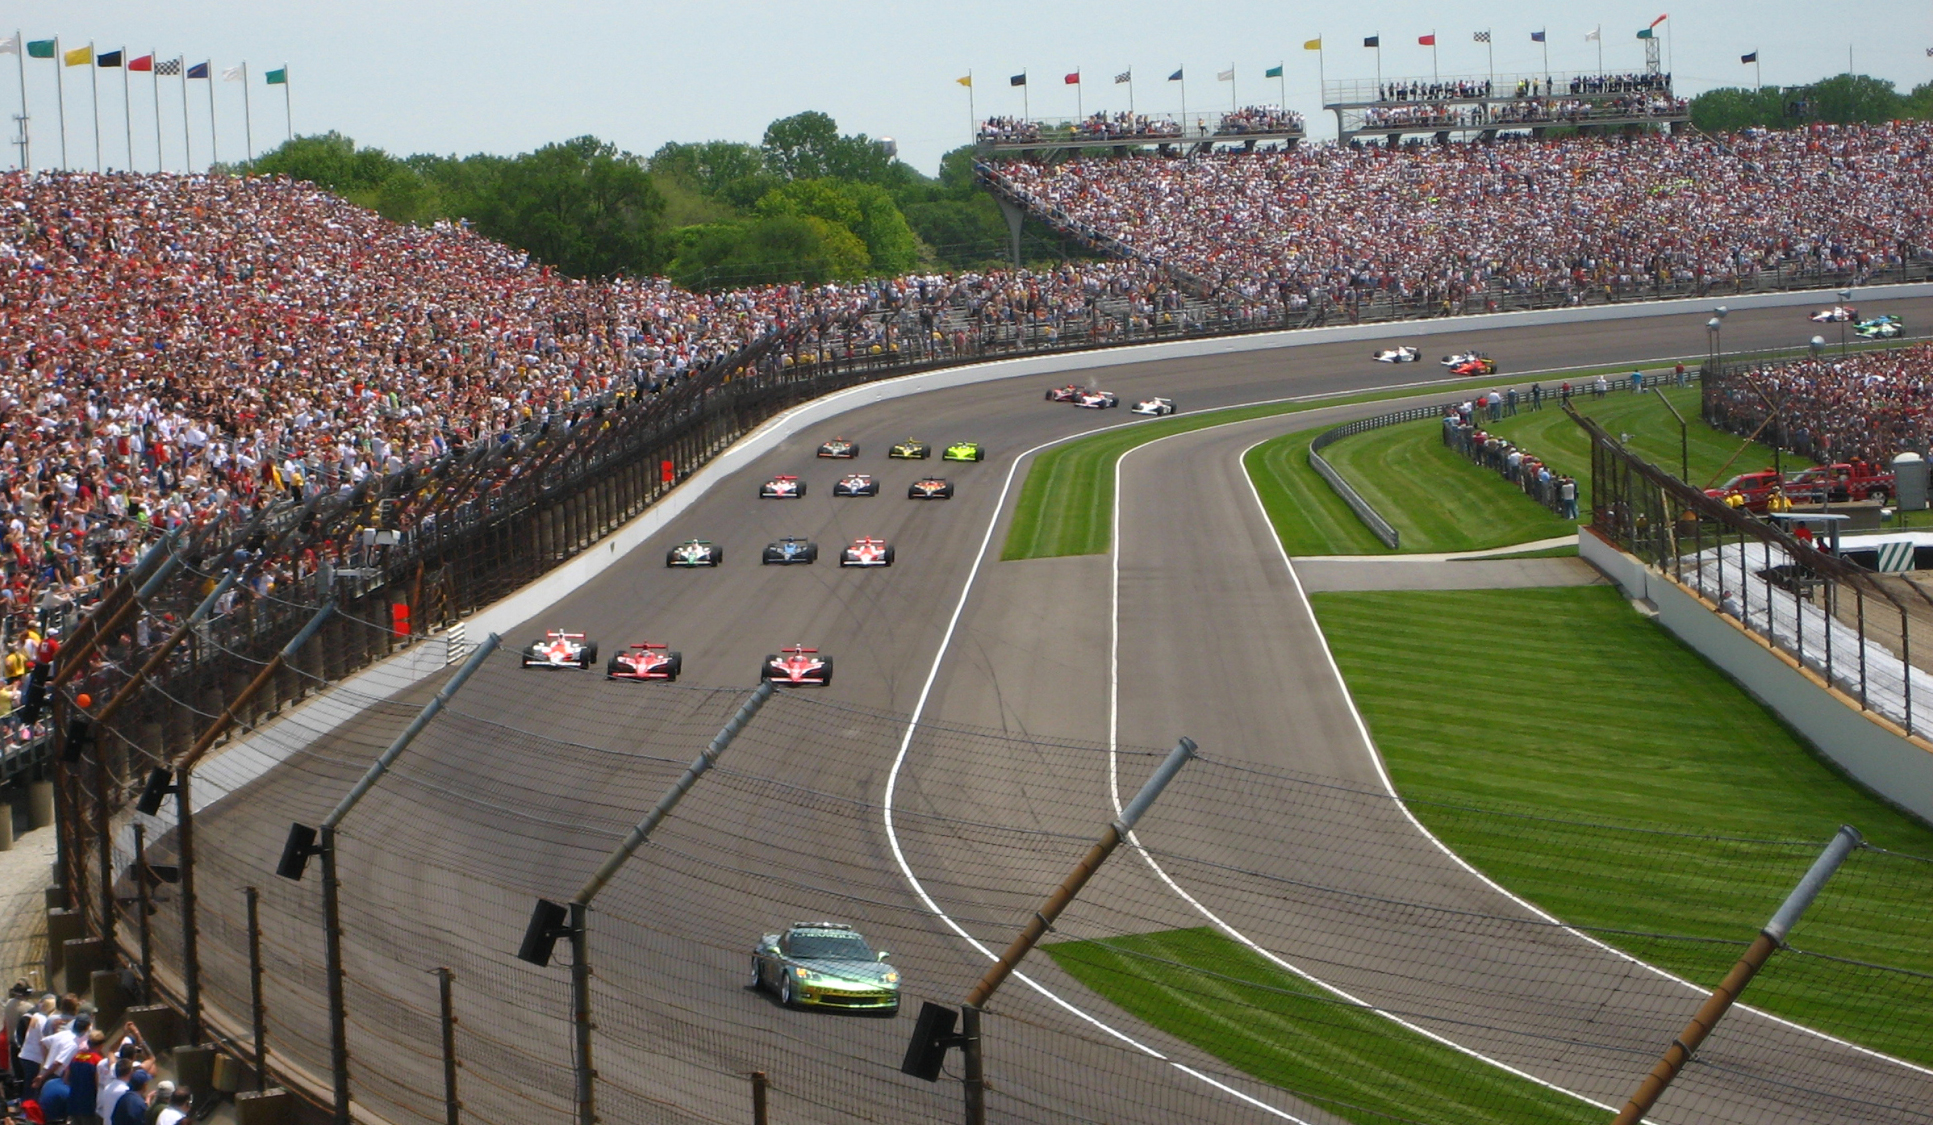 Indianapolis 500 Season 2020 To Be Held Without Fans Due to COVID-19